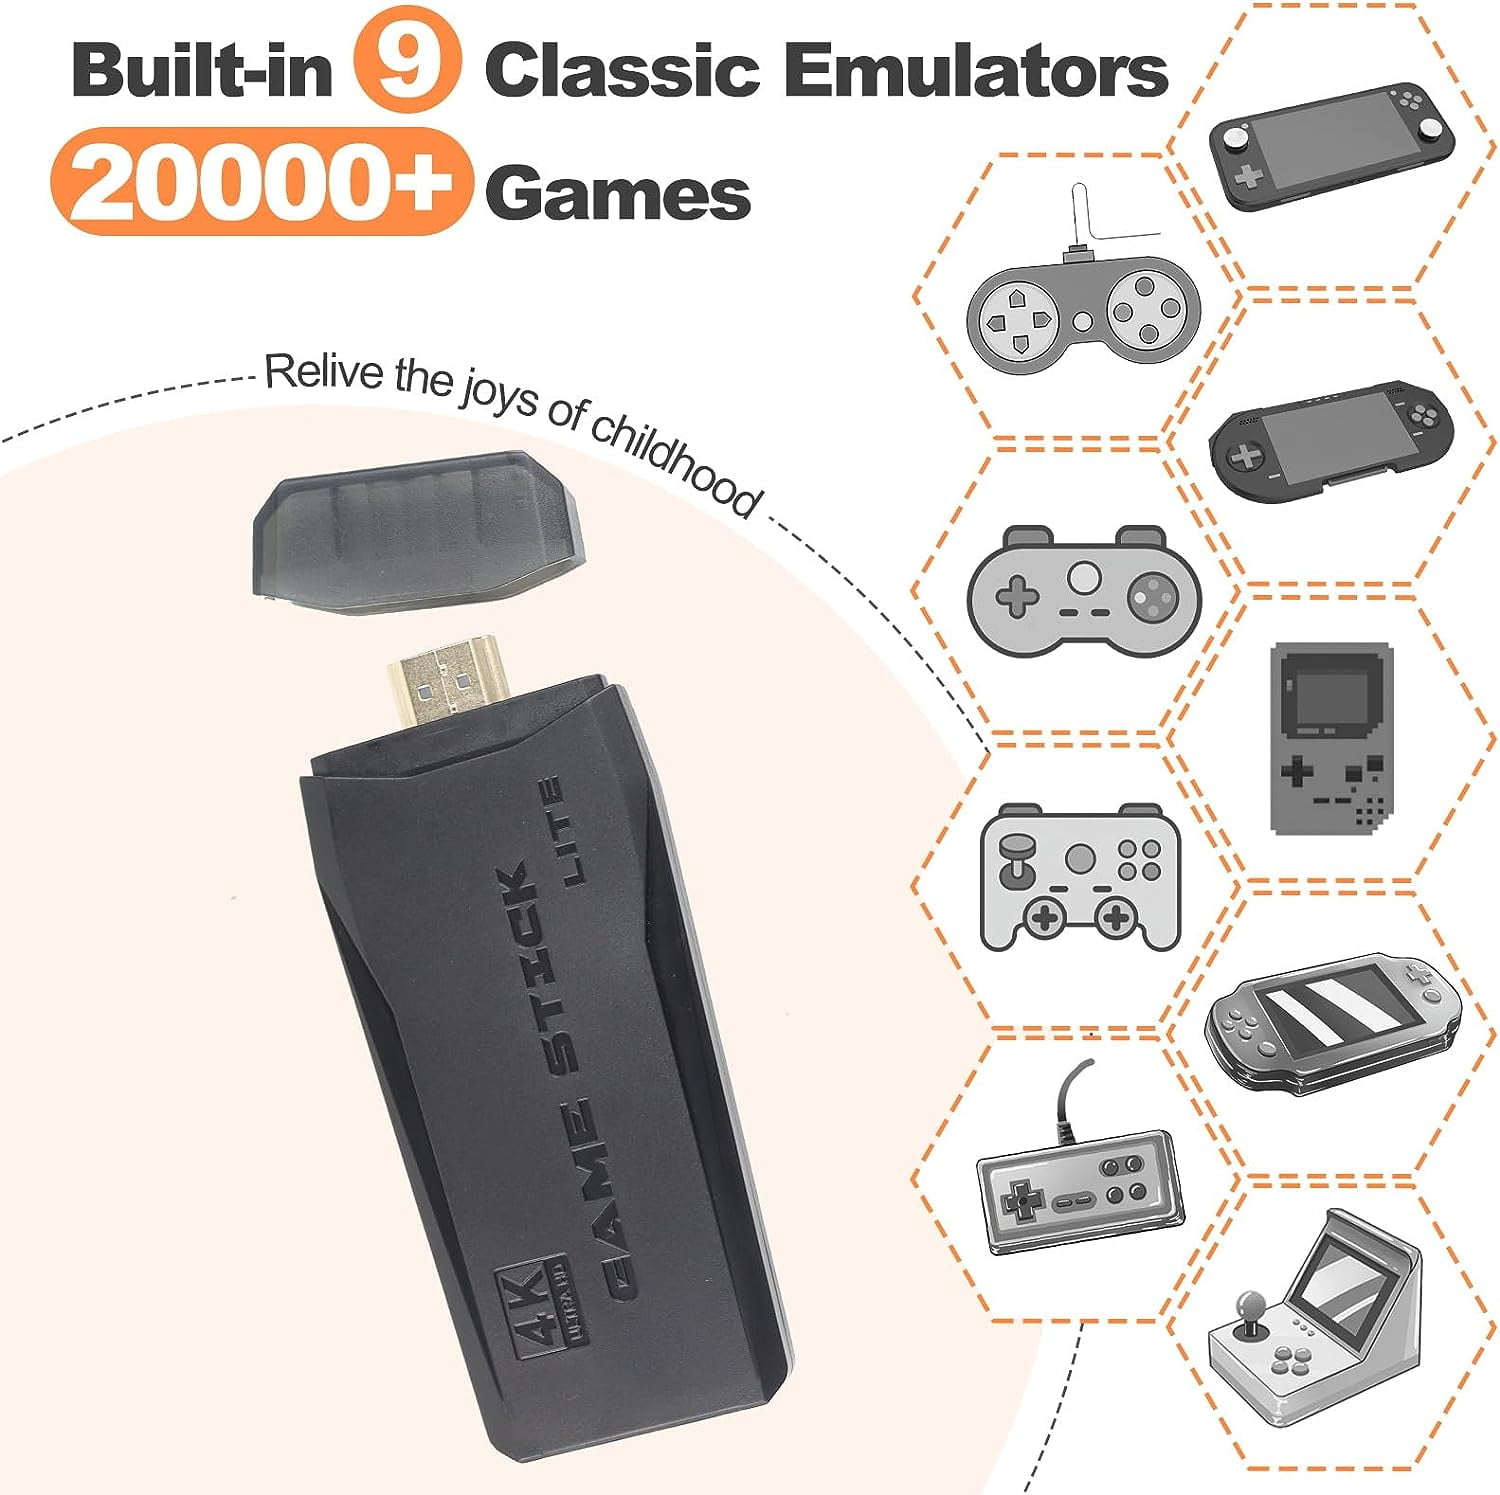 Retro Game Stick - Revisit Classic Games with Built-in 9 Emulators, 20,000+  Games, 4K HDMI Output, and 2.4GHz Wireless Controller for TV Plug and Play  (64 G) 